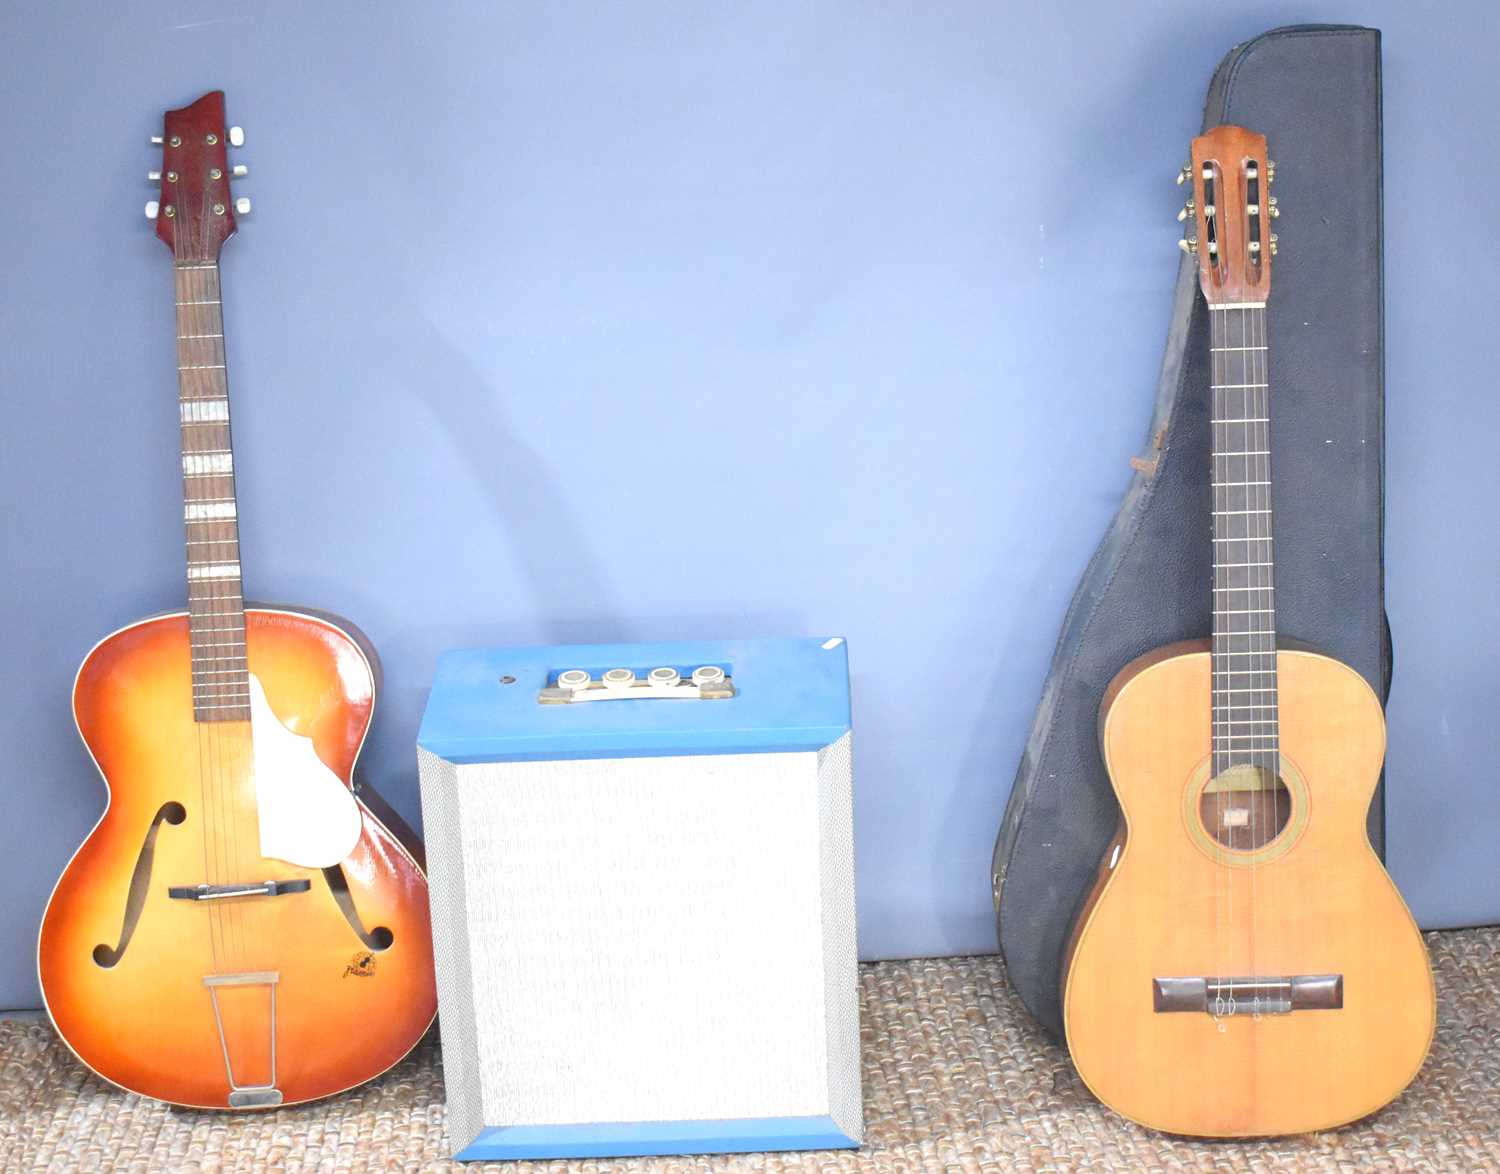 A vintage Framus acoustic guitar together with a Carlos Guermantes classical / acoustic guitar in